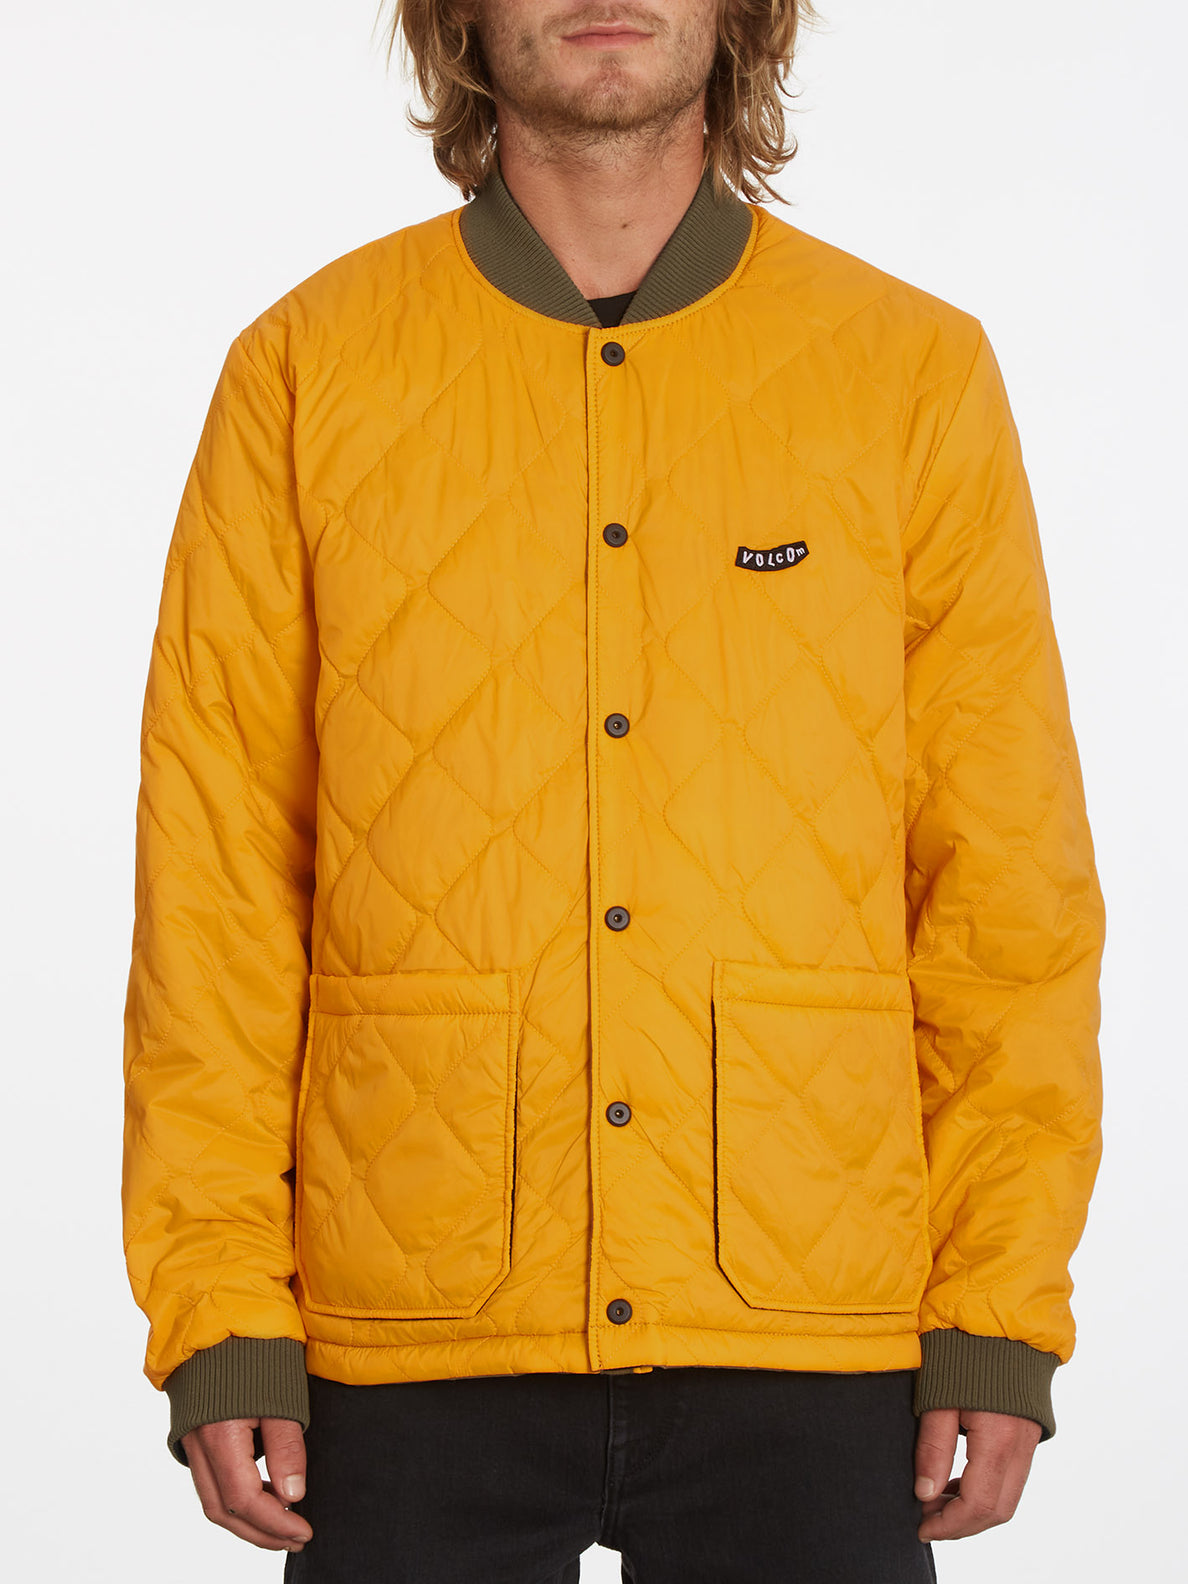 Lookster Jacket (Reversible) - SERVICE GREEN (A1632007_SVG) [B]